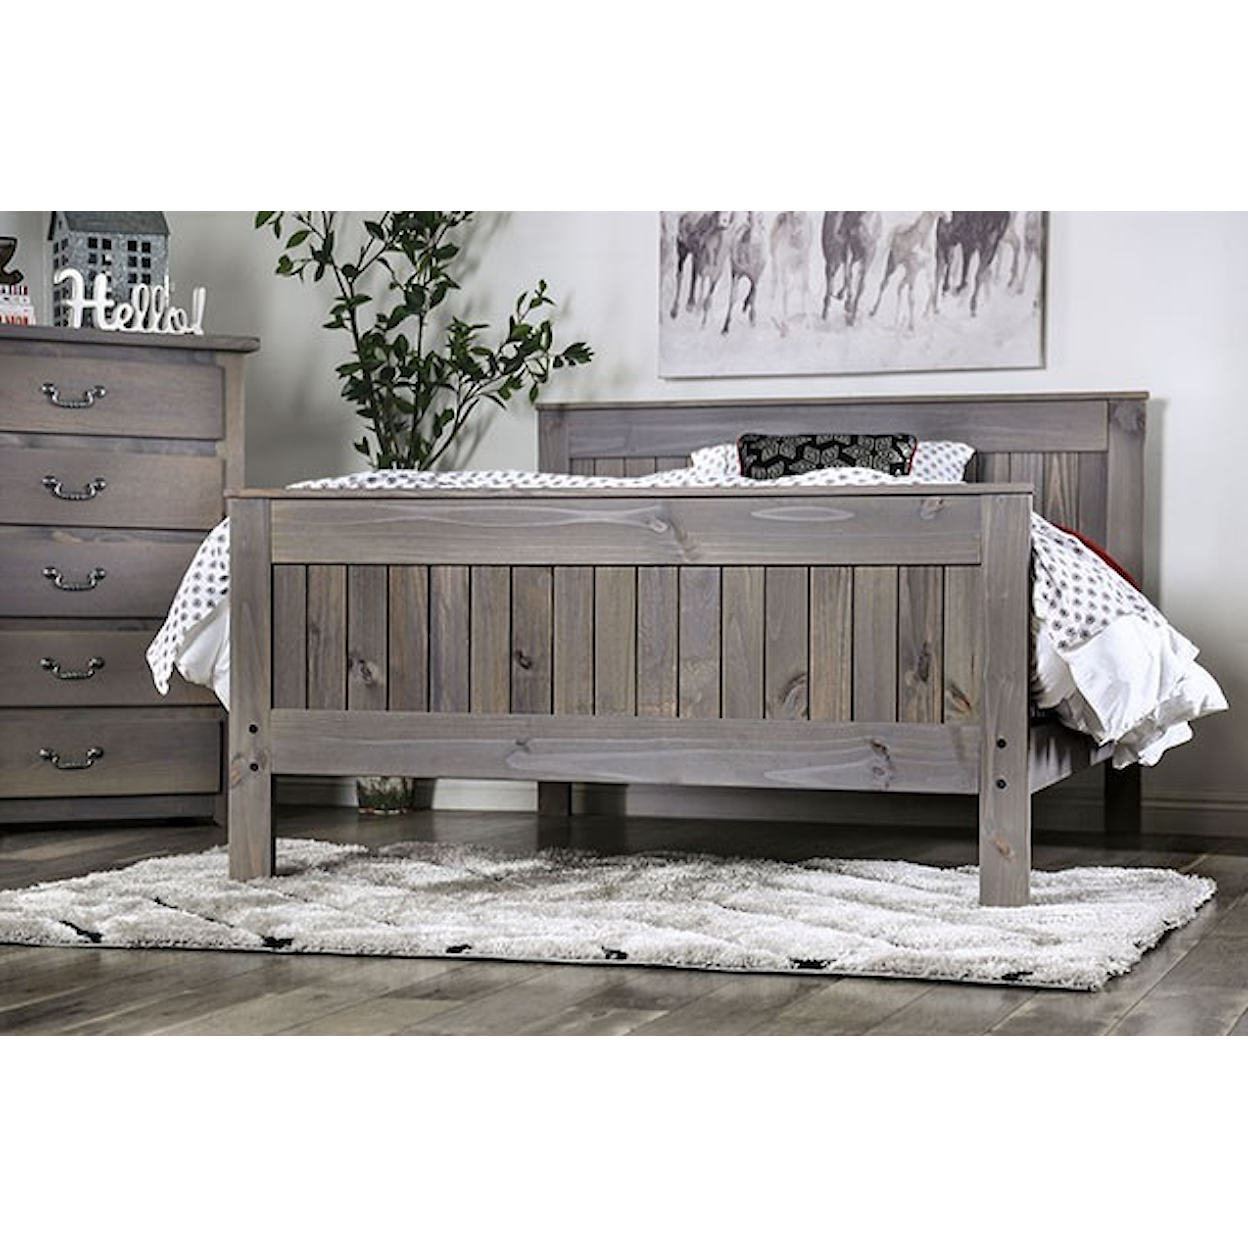 Furniture of America Rockwall Full Panel Bed